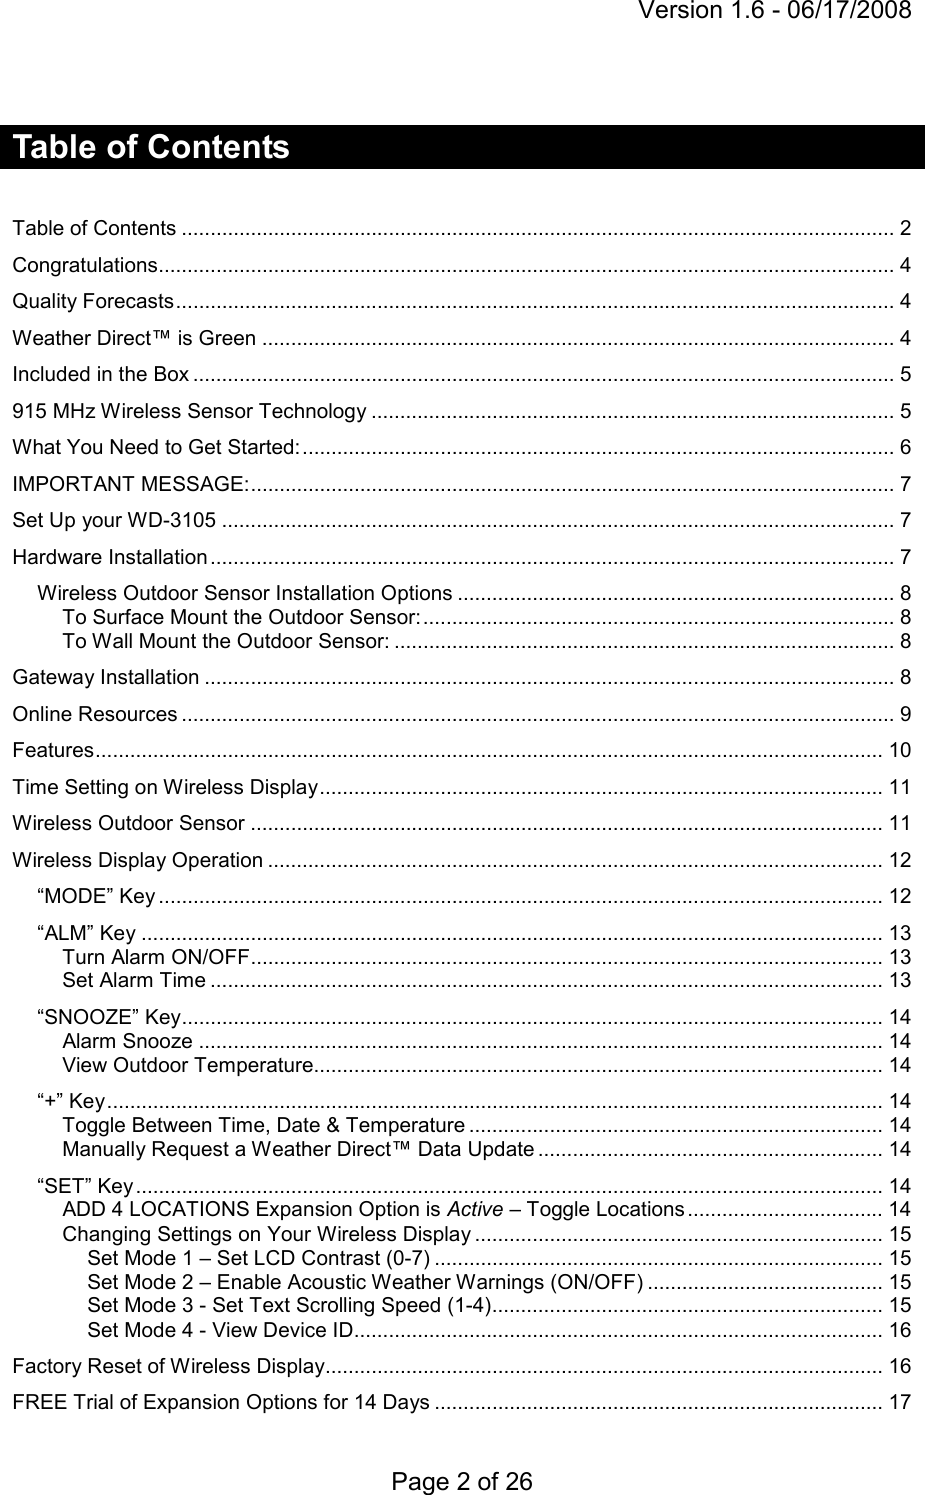 Version 1.6 - 06/17/2008 Page 2 of 26  Table of Contents   Table of Contents ............................................................................................................................ 2 Congratulations................................................................................................................................ 4 Quality Forecasts............................................................................................................................. 4 Weather Direct™ is Green .............................................................................................................. 4 Included in the Box .......................................................................................................................... 5 915 MHz Wireless Sensor Technology ........................................................................................... 5 What You Need to Get Started:....................................................................................................... 6 IMPORTANT MESSAGE:................................................................................................................ 7 Set Up your WD-3105 ..................................................................................................................... 7 Hardware Installation ....................................................................................................................... 7 Wireless Outdoor Sensor Installation Options ............................................................................ 8 To Surface Mount the Outdoor Sensor:.................................................................................. 8 To Wall Mount the Outdoor Sensor: ....................................................................................... 8 Gateway Installation ........................................................................................................................ 8 Online Resources ............................................................................................................................ 9 Features......................................................................................................................................... 10 Time Setting on Wireless Display.................................................................................................. 11 Wireless Outdoor Sensor .............................................................................................................. 11 Wireless Display Operation ........................................................................................................... 12 “MODE” Key .............................................................................................................................. 12 “ALM” Key ................................................................................................................................. 13 Turn Alarm ON/OFF.............................................................................................................. 13 Set Alarm Time ..................................................................................................................... 13 “SNOOZE” Key.......................................................................................................................... 14 Alarm Snooze ....................................................................................................................... 14 View Outdoor Temperature................................................................................................... 14 “+” Key....................................................................................................................................... 14 Toggle Between Time, Date &amp; Temperature ........................................................................ 14 Manually Request a Weather Direct™ Data Update ............................................................ 14 “SET” Key.................................................................................................................................. 14 ADD 4 LOCATIONS Expansion Option is Active – Toggle Locations .................................. 14 Changing Settings on Your Wireless Display ....................................................................... 15 Set Mode 1 – Set LCD Contrast (0-7) .............................................................................. 15 Set Mode 2 – Enable Acoustic Weather Warnings (ON/OFF) ......................................... 15 Set Mode 3 - Set Text Scrolling Speed (1-4).................................................................... 15 Set Mode 4 - View Device ID............................................................................................ 16 Factory Reset of Wireless Display................................................................................................. 16 FREE Trial of Expansion Options for 14 Days .............................................................................. 17 